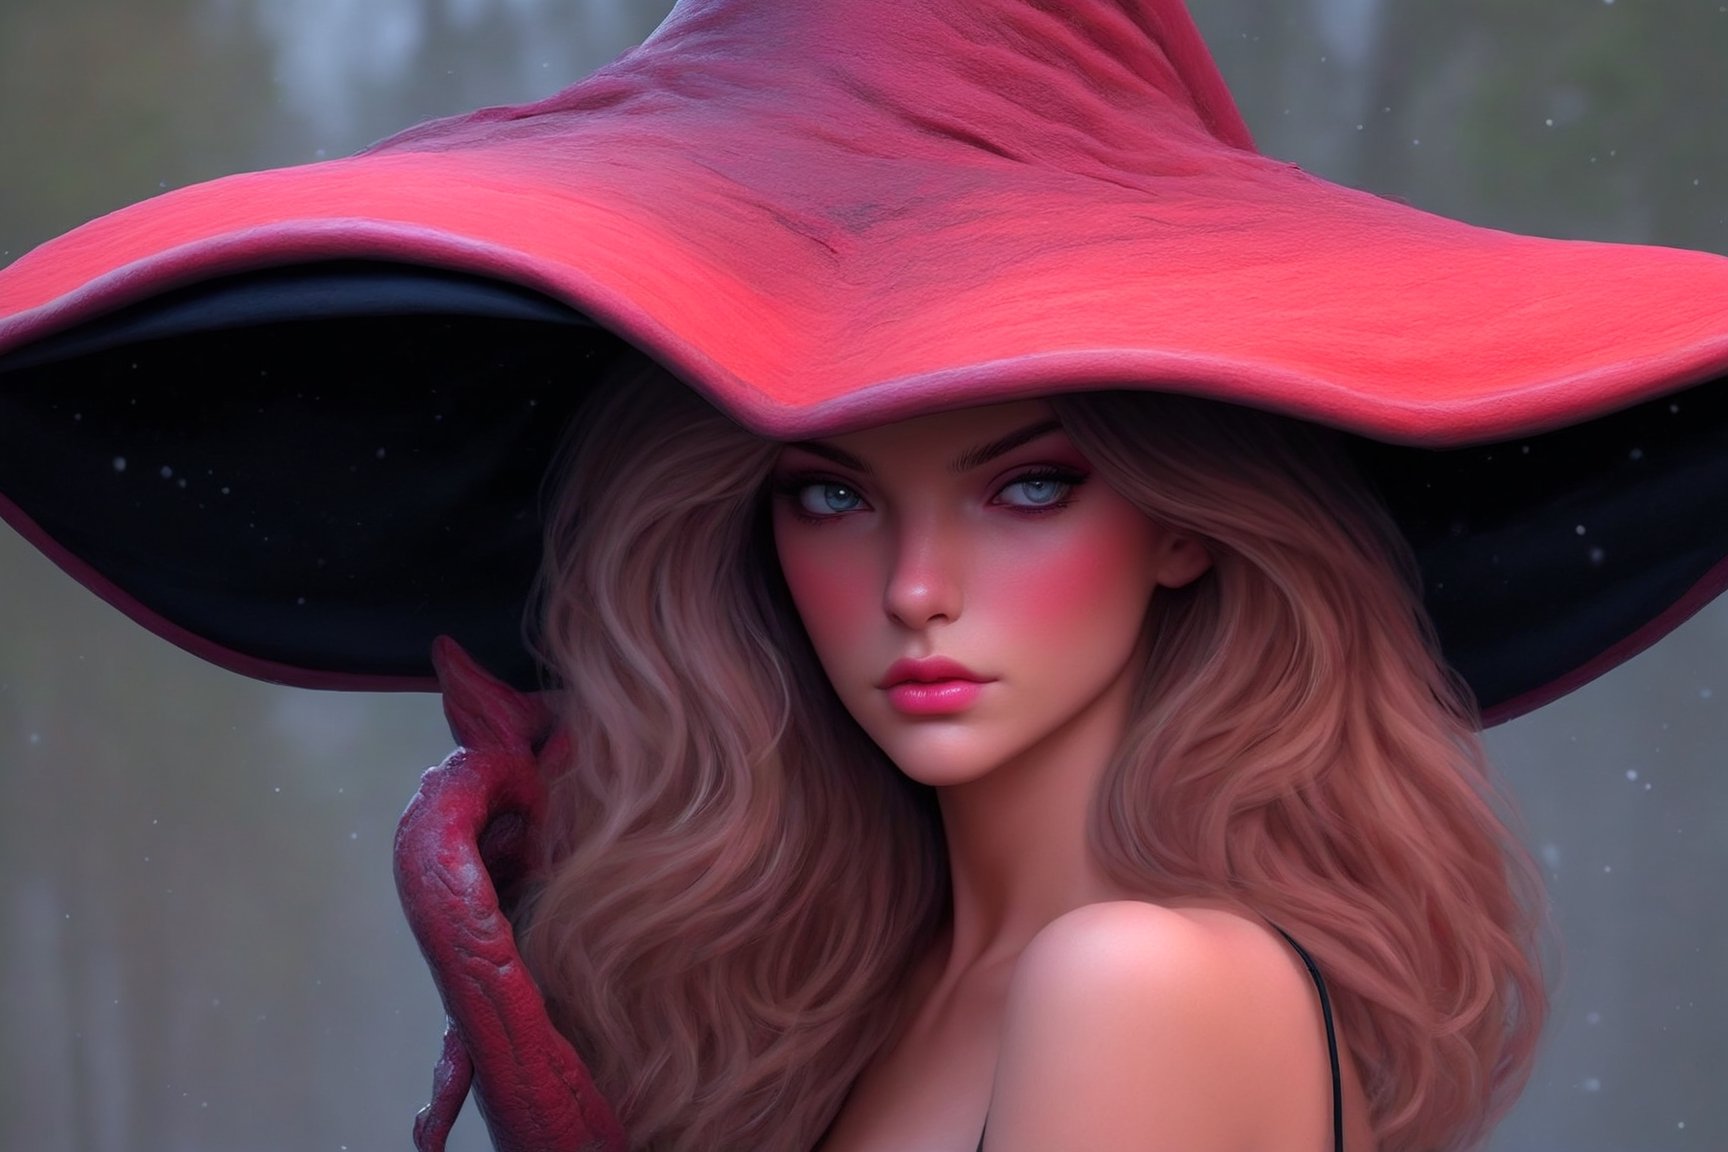 ((Ultra-Detailed)) portrait of a girl wearing a witchhat, standing in front of a modern resort house,1 girl,20yo,detailed exquisite face,soft shiny skin,playful smirks,detailed pretty eyes,glossy lips 
BREAK
HOUSE:very sophisticated and stylish mountain home,contemporary design,luxurious, windows,snow,snowing, street,trees,mid-size house,
(girl and house focus)
BREAK 
sharp focus,high contrast,studio photo,trending on artstation,ultra-realistic,Super-detailed,intricate details,HDR,8K,chiaroscuro lighting,vibrant colors,by Karol Bak,Gustav Klimt and Hayao Miyazaki,
inkycapwitchyhat,real_booster,photo_b00ster,InkyCapWitchyHat,w1nter res0rt,art_booster